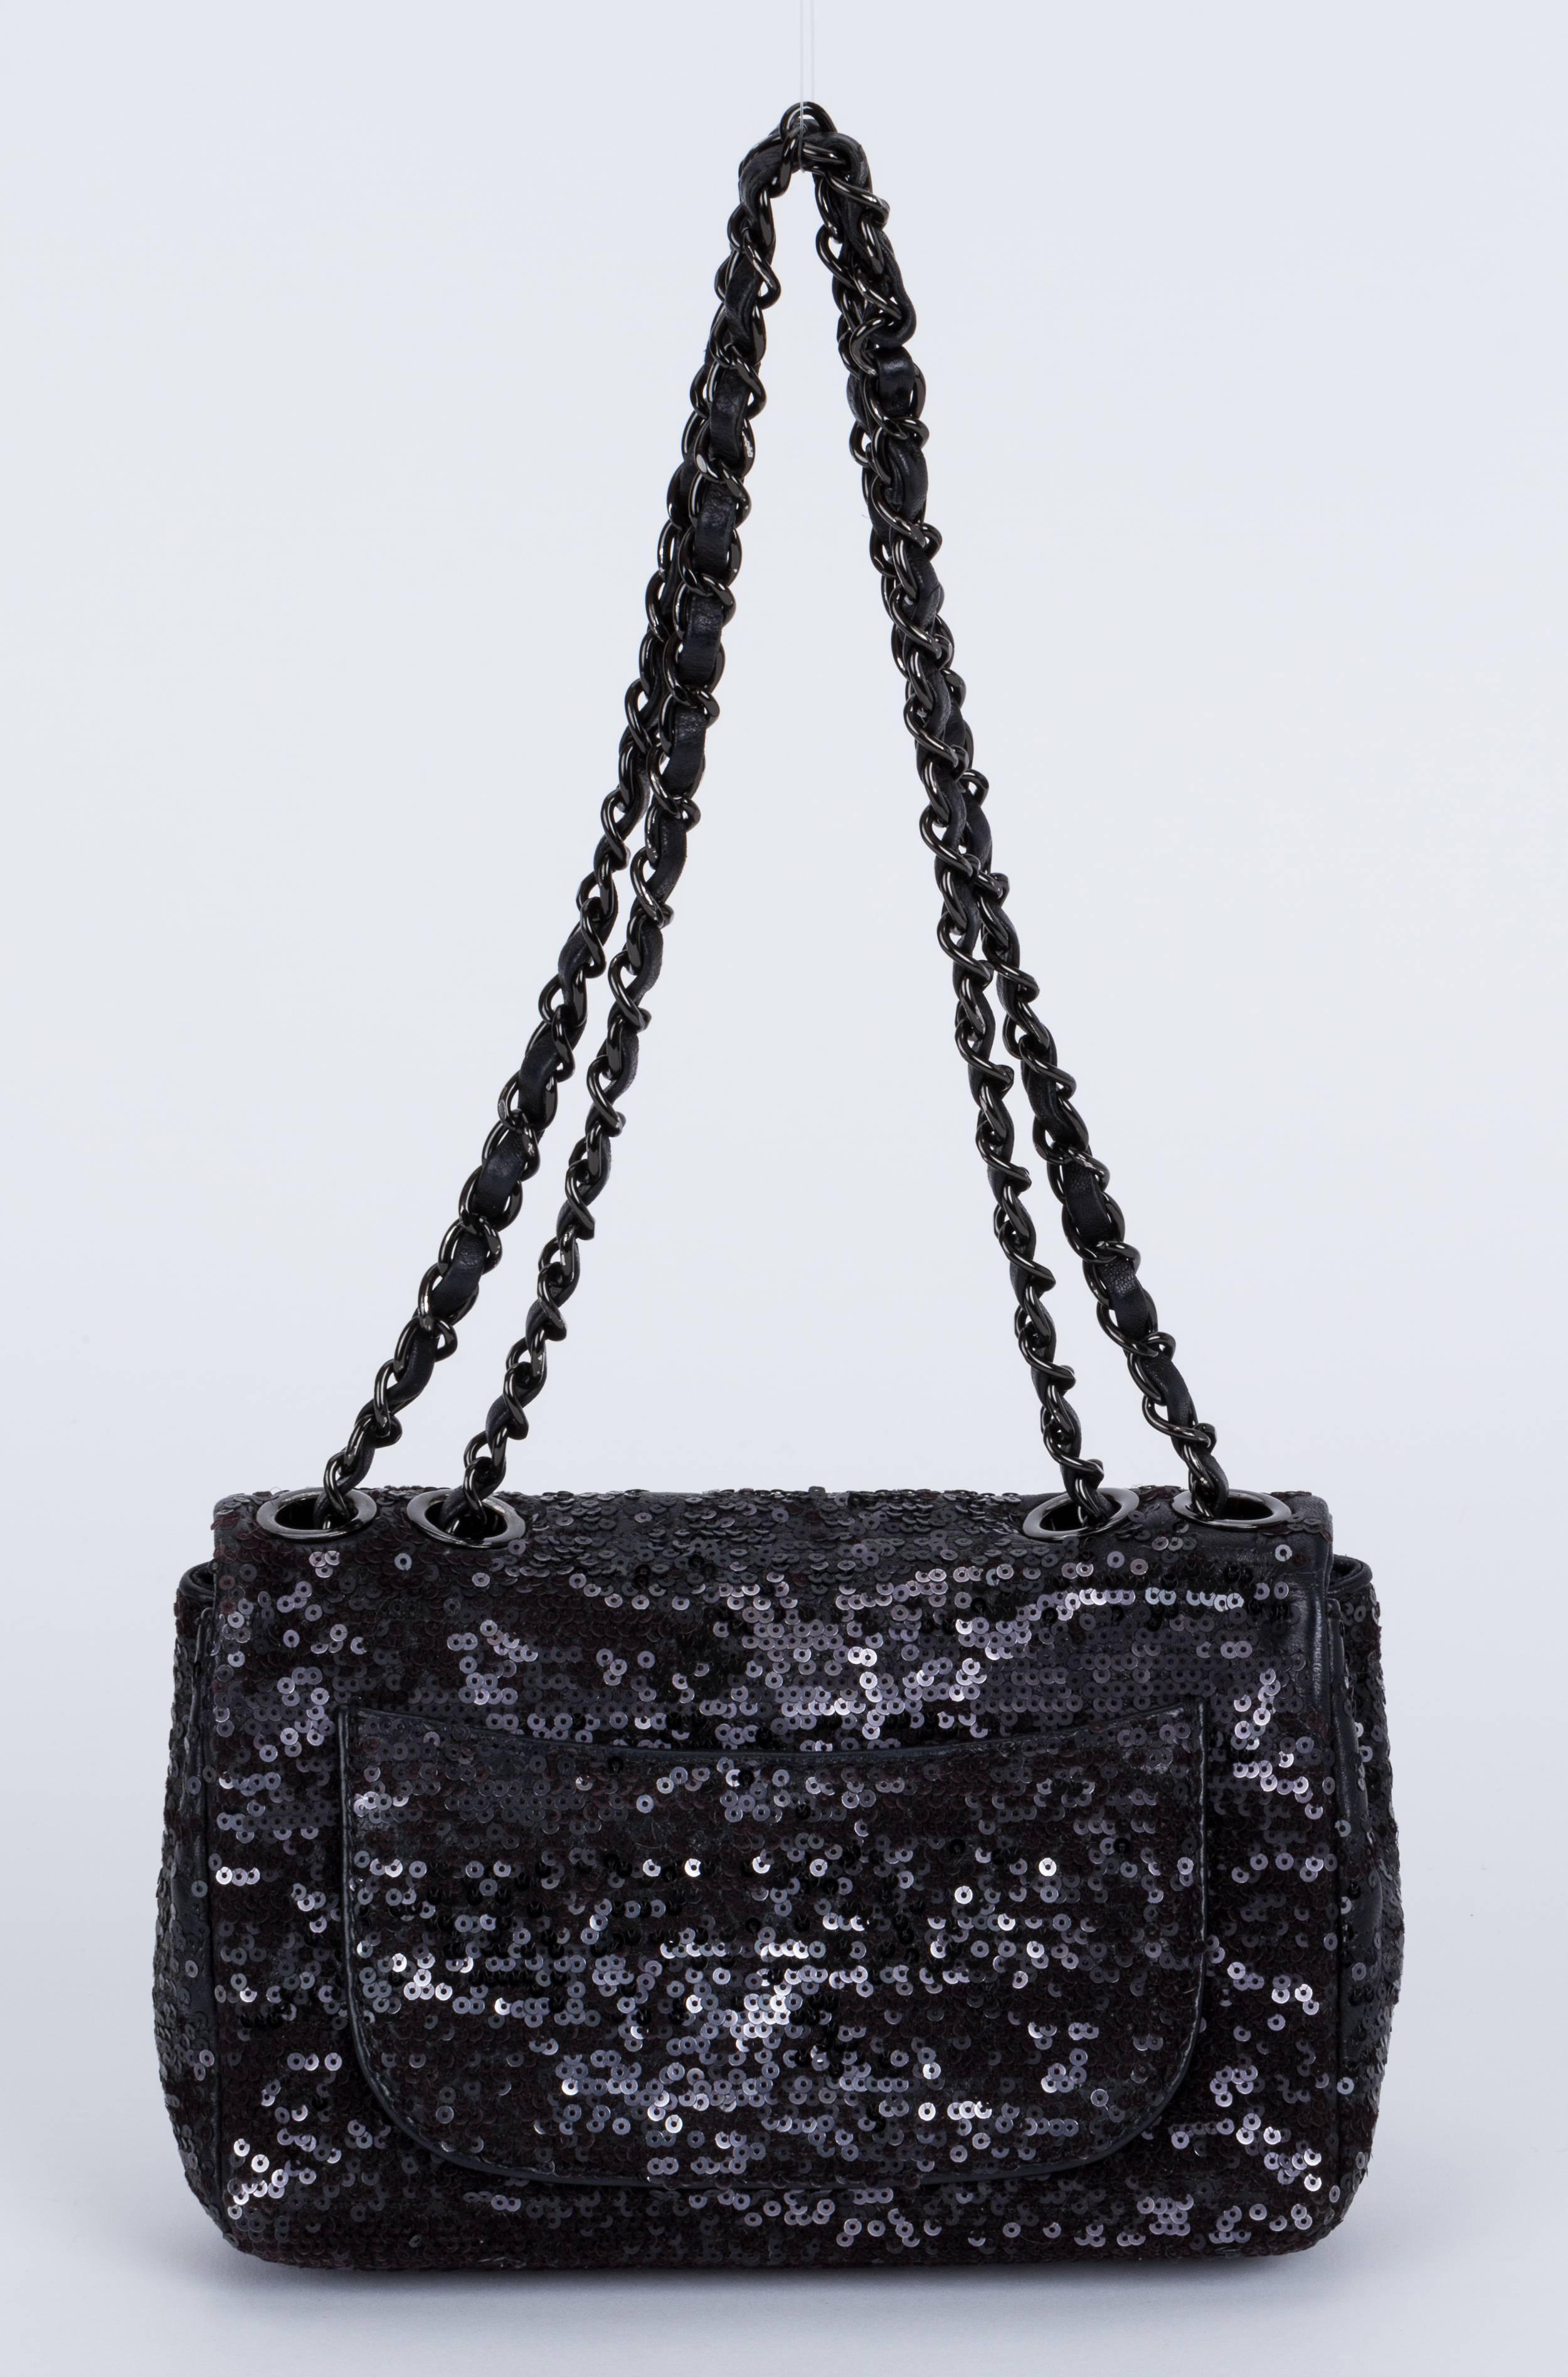 Chanel Black Leather Sequins Handbag In Excellent Condition In West Hollywood, CA